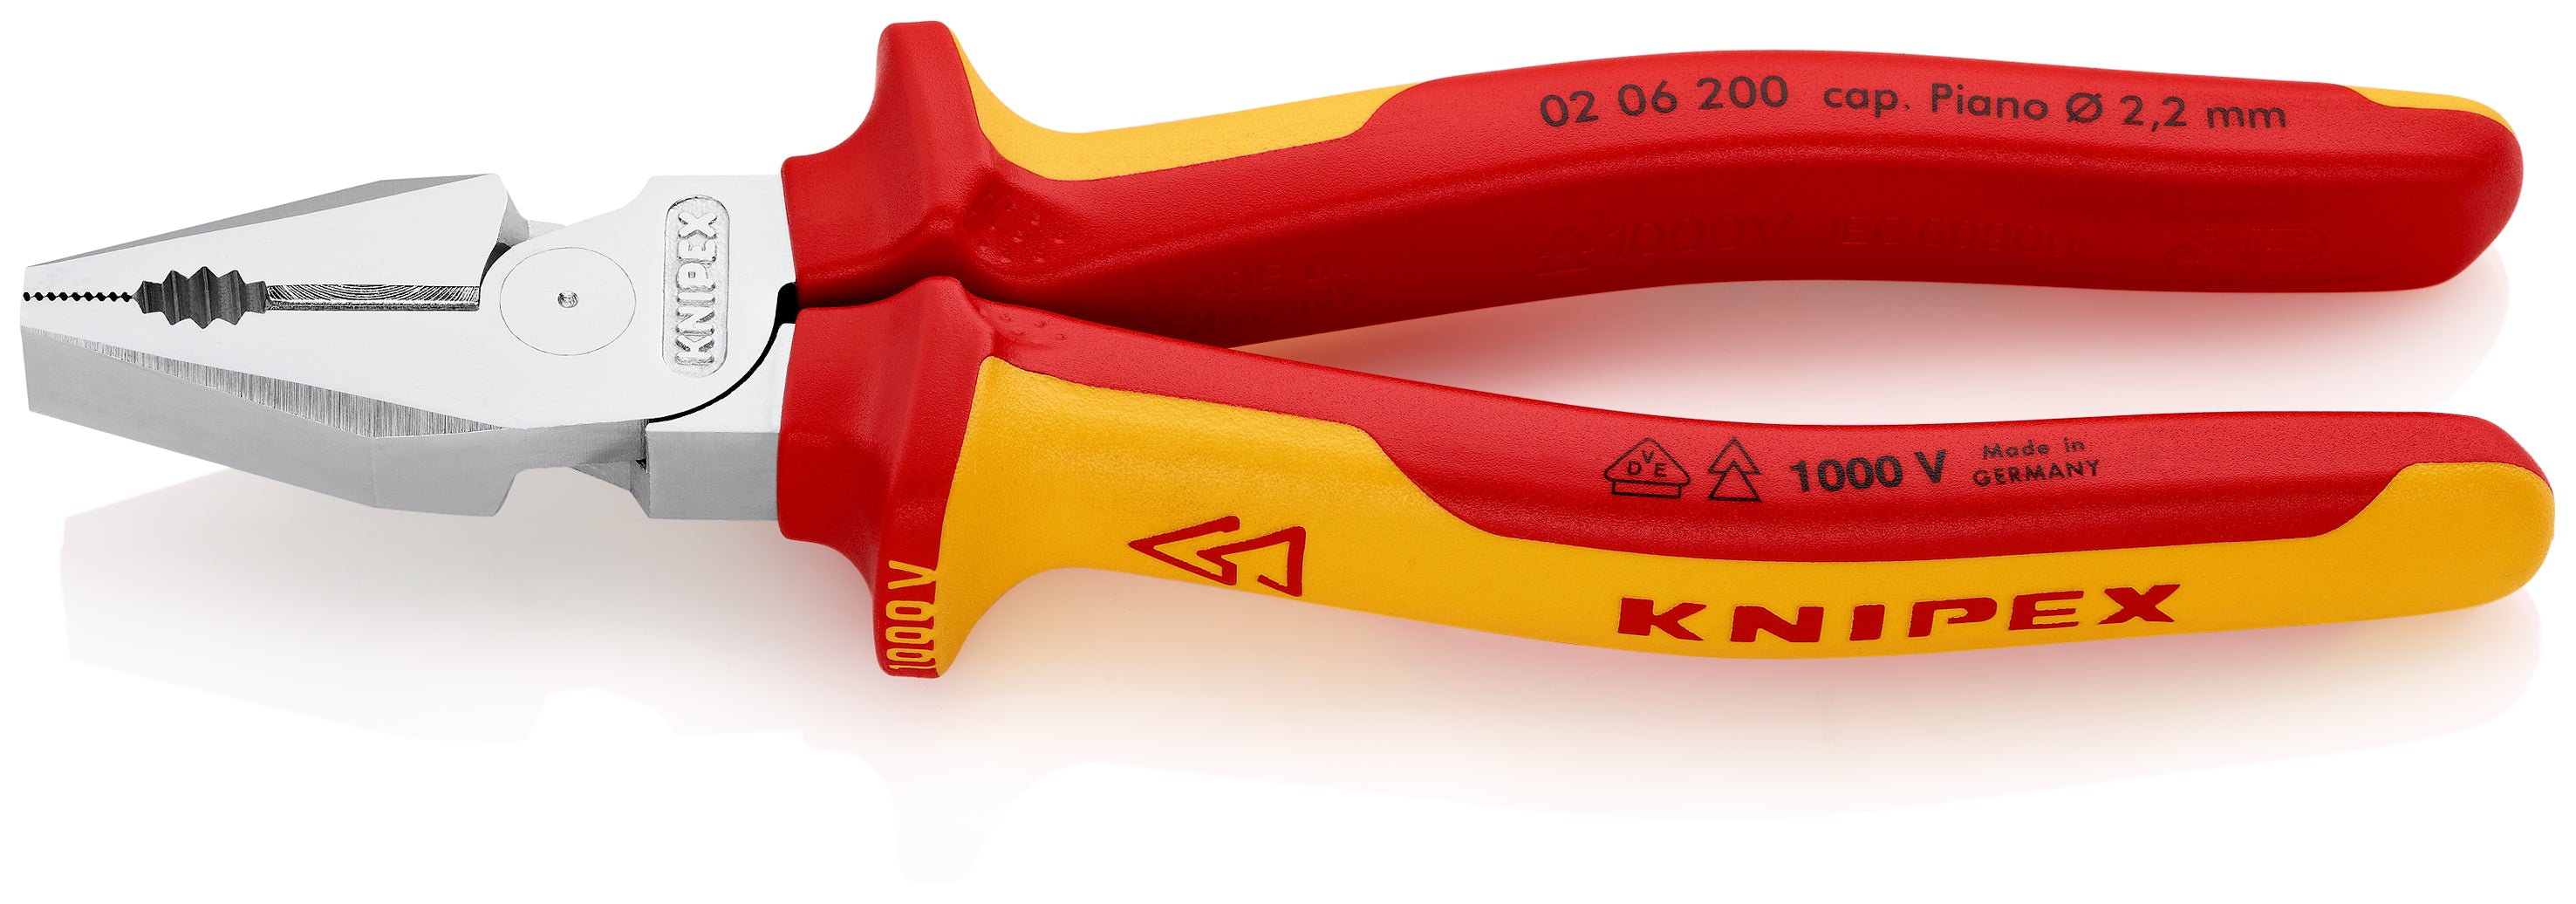 KNIPEX 02 06 180 INSULATED HIGH LEVERAGE COMBINATION PLIERS VDE 1000v Germany 